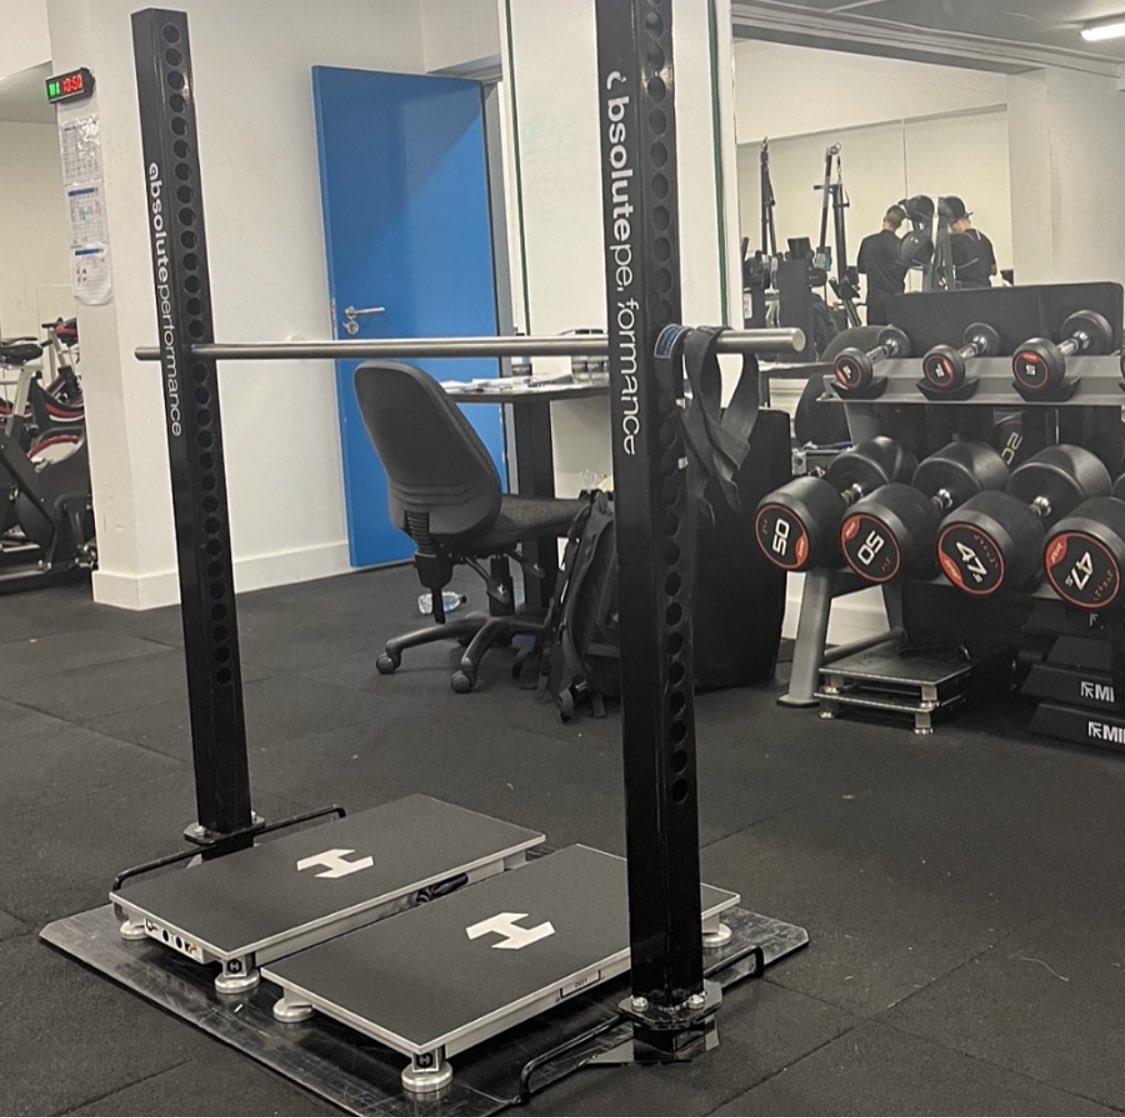 Best accessories I use for force plate testing! ⬇️ ✈️ Travel cases to store and transport equipment safely 🚀 Specialised foam surrounds give athletes the confidence to max out 📱 A tablet stand allows the group to see key info ⚒️ Steel rigs for a range of isometric tests